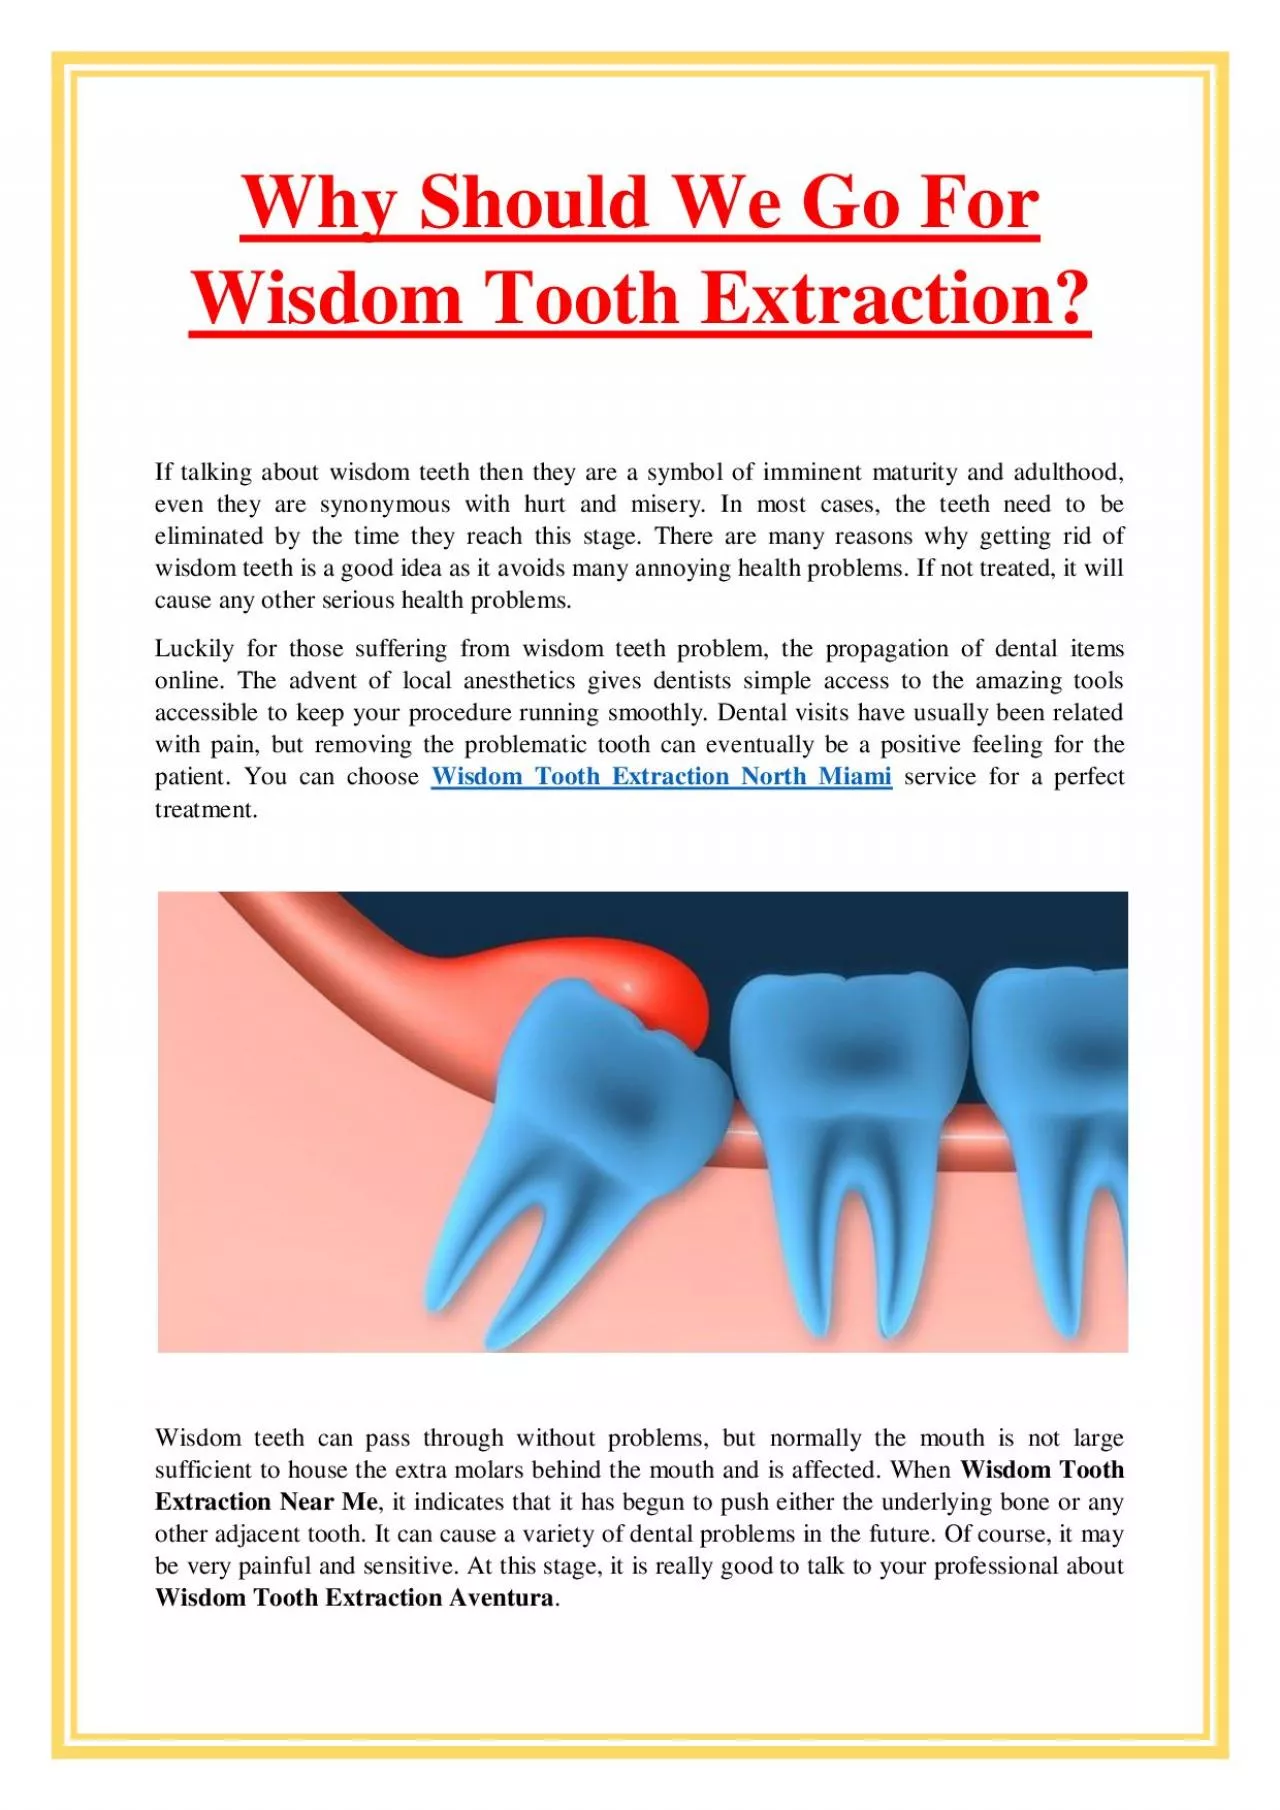 Why Should We Go For Wisdom Tooth Extraction?